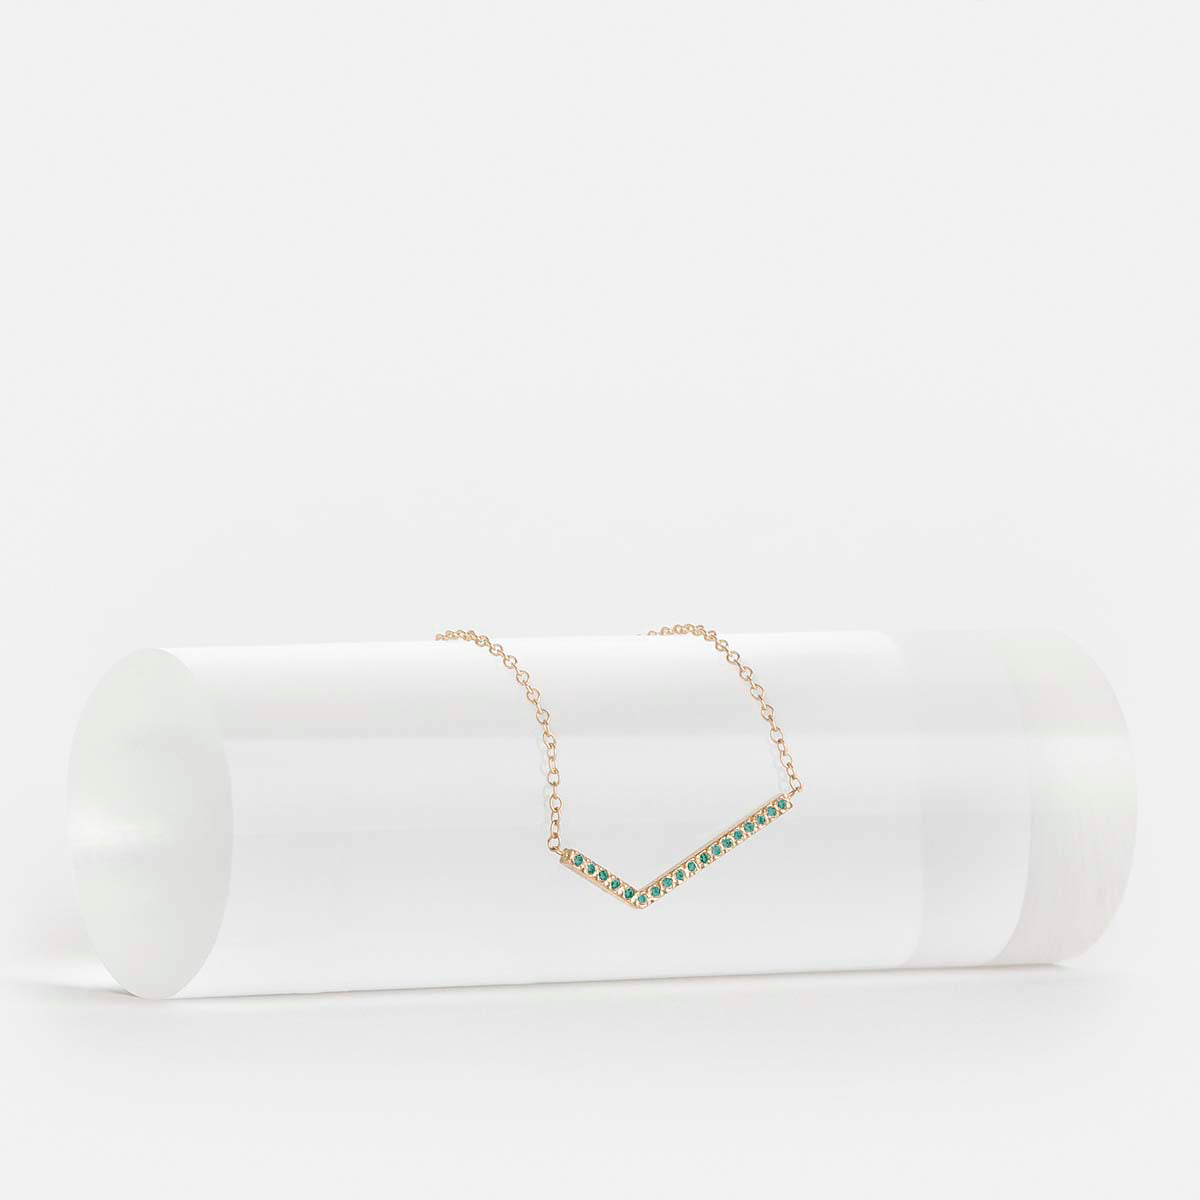 Veva Non-Traditional Necklace in 14k Gold set with Emeralds By SHW Fine Jewelry NYC